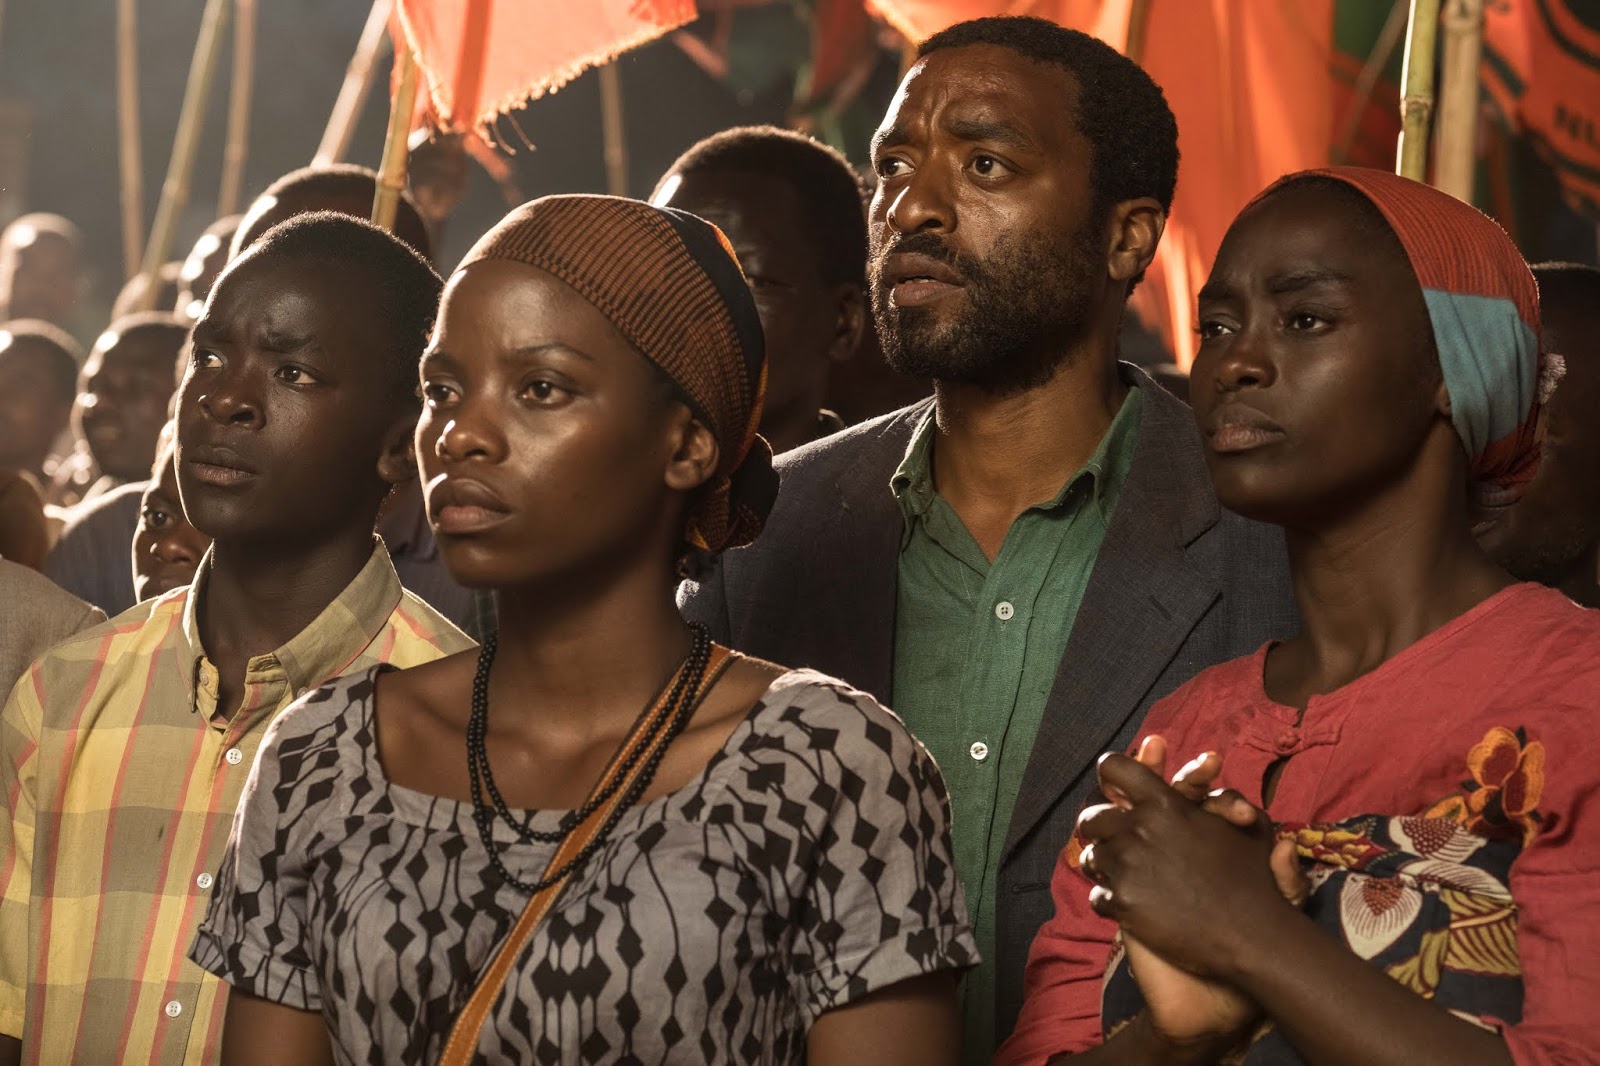 The Boy Who Harnessed The Wind Trailer Available Now! Releasing 3/1 on